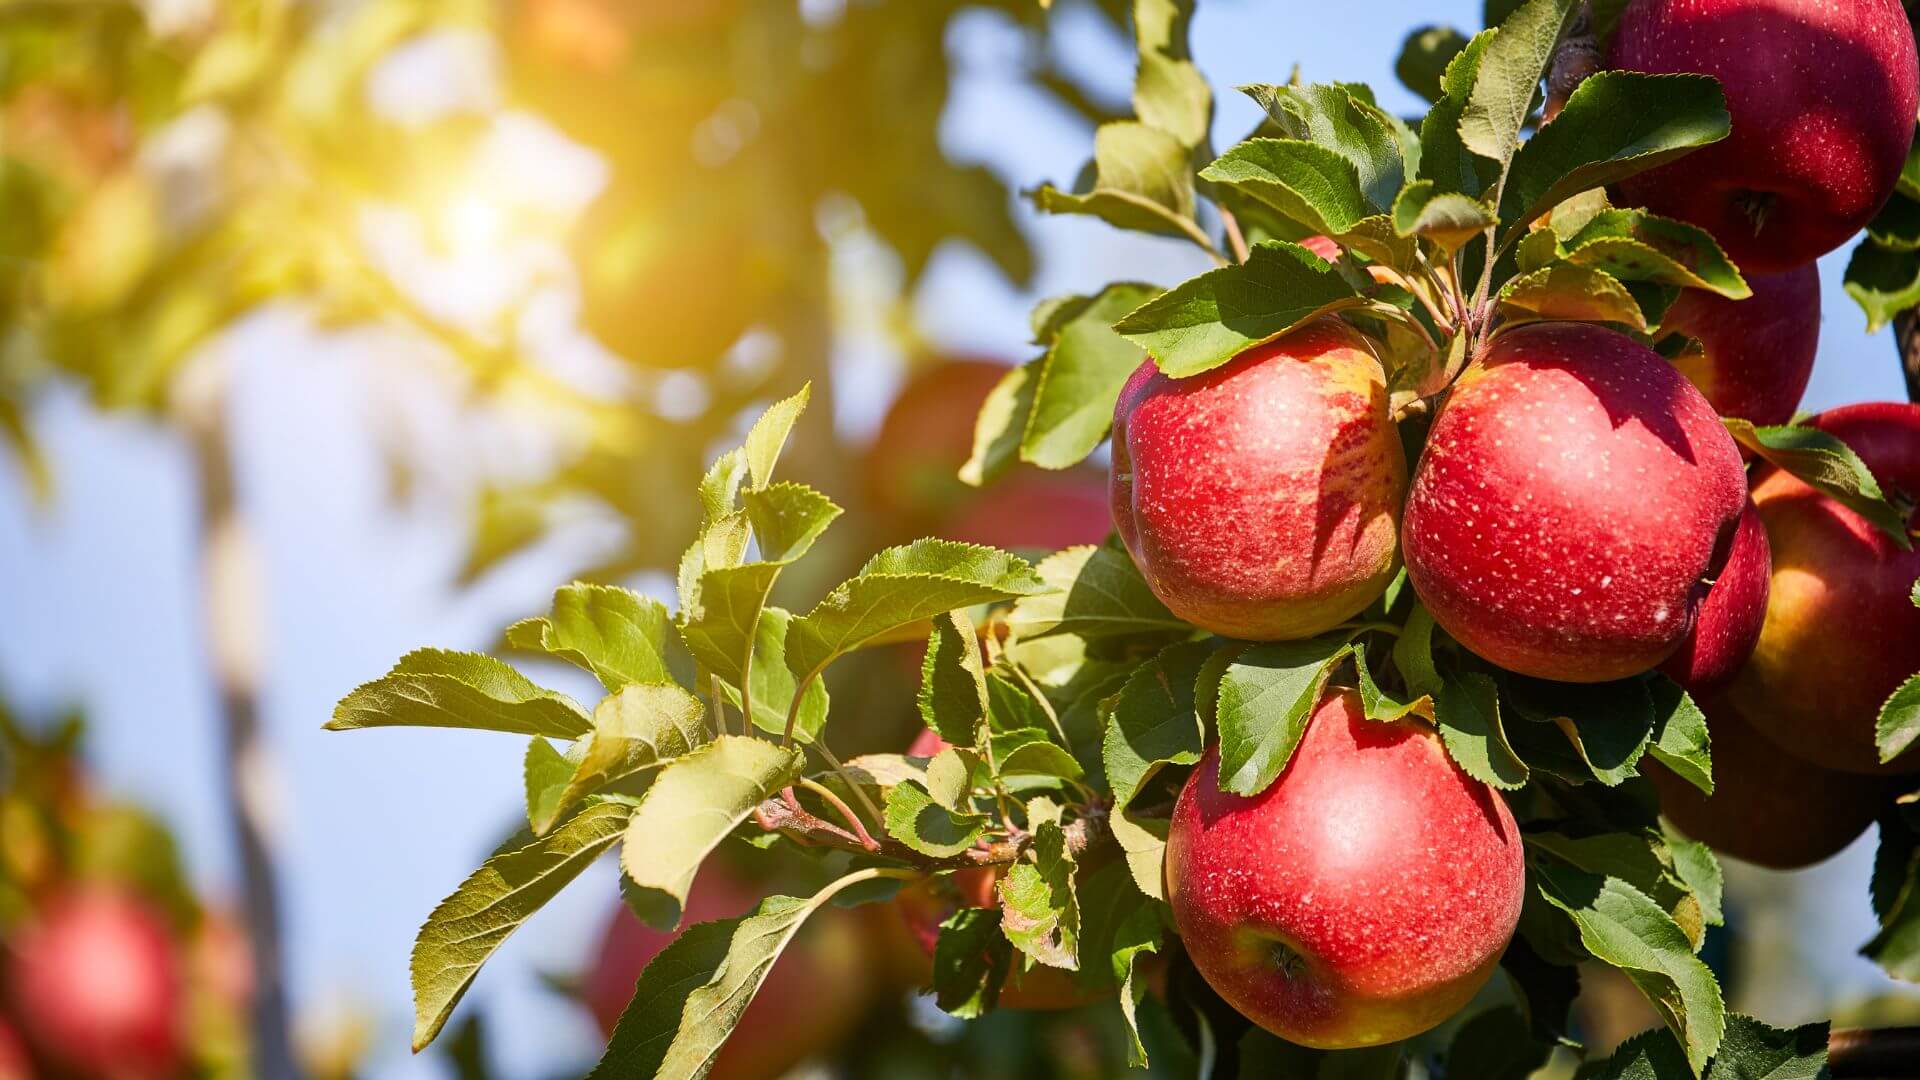 Closeup of ripe apples in an orchard